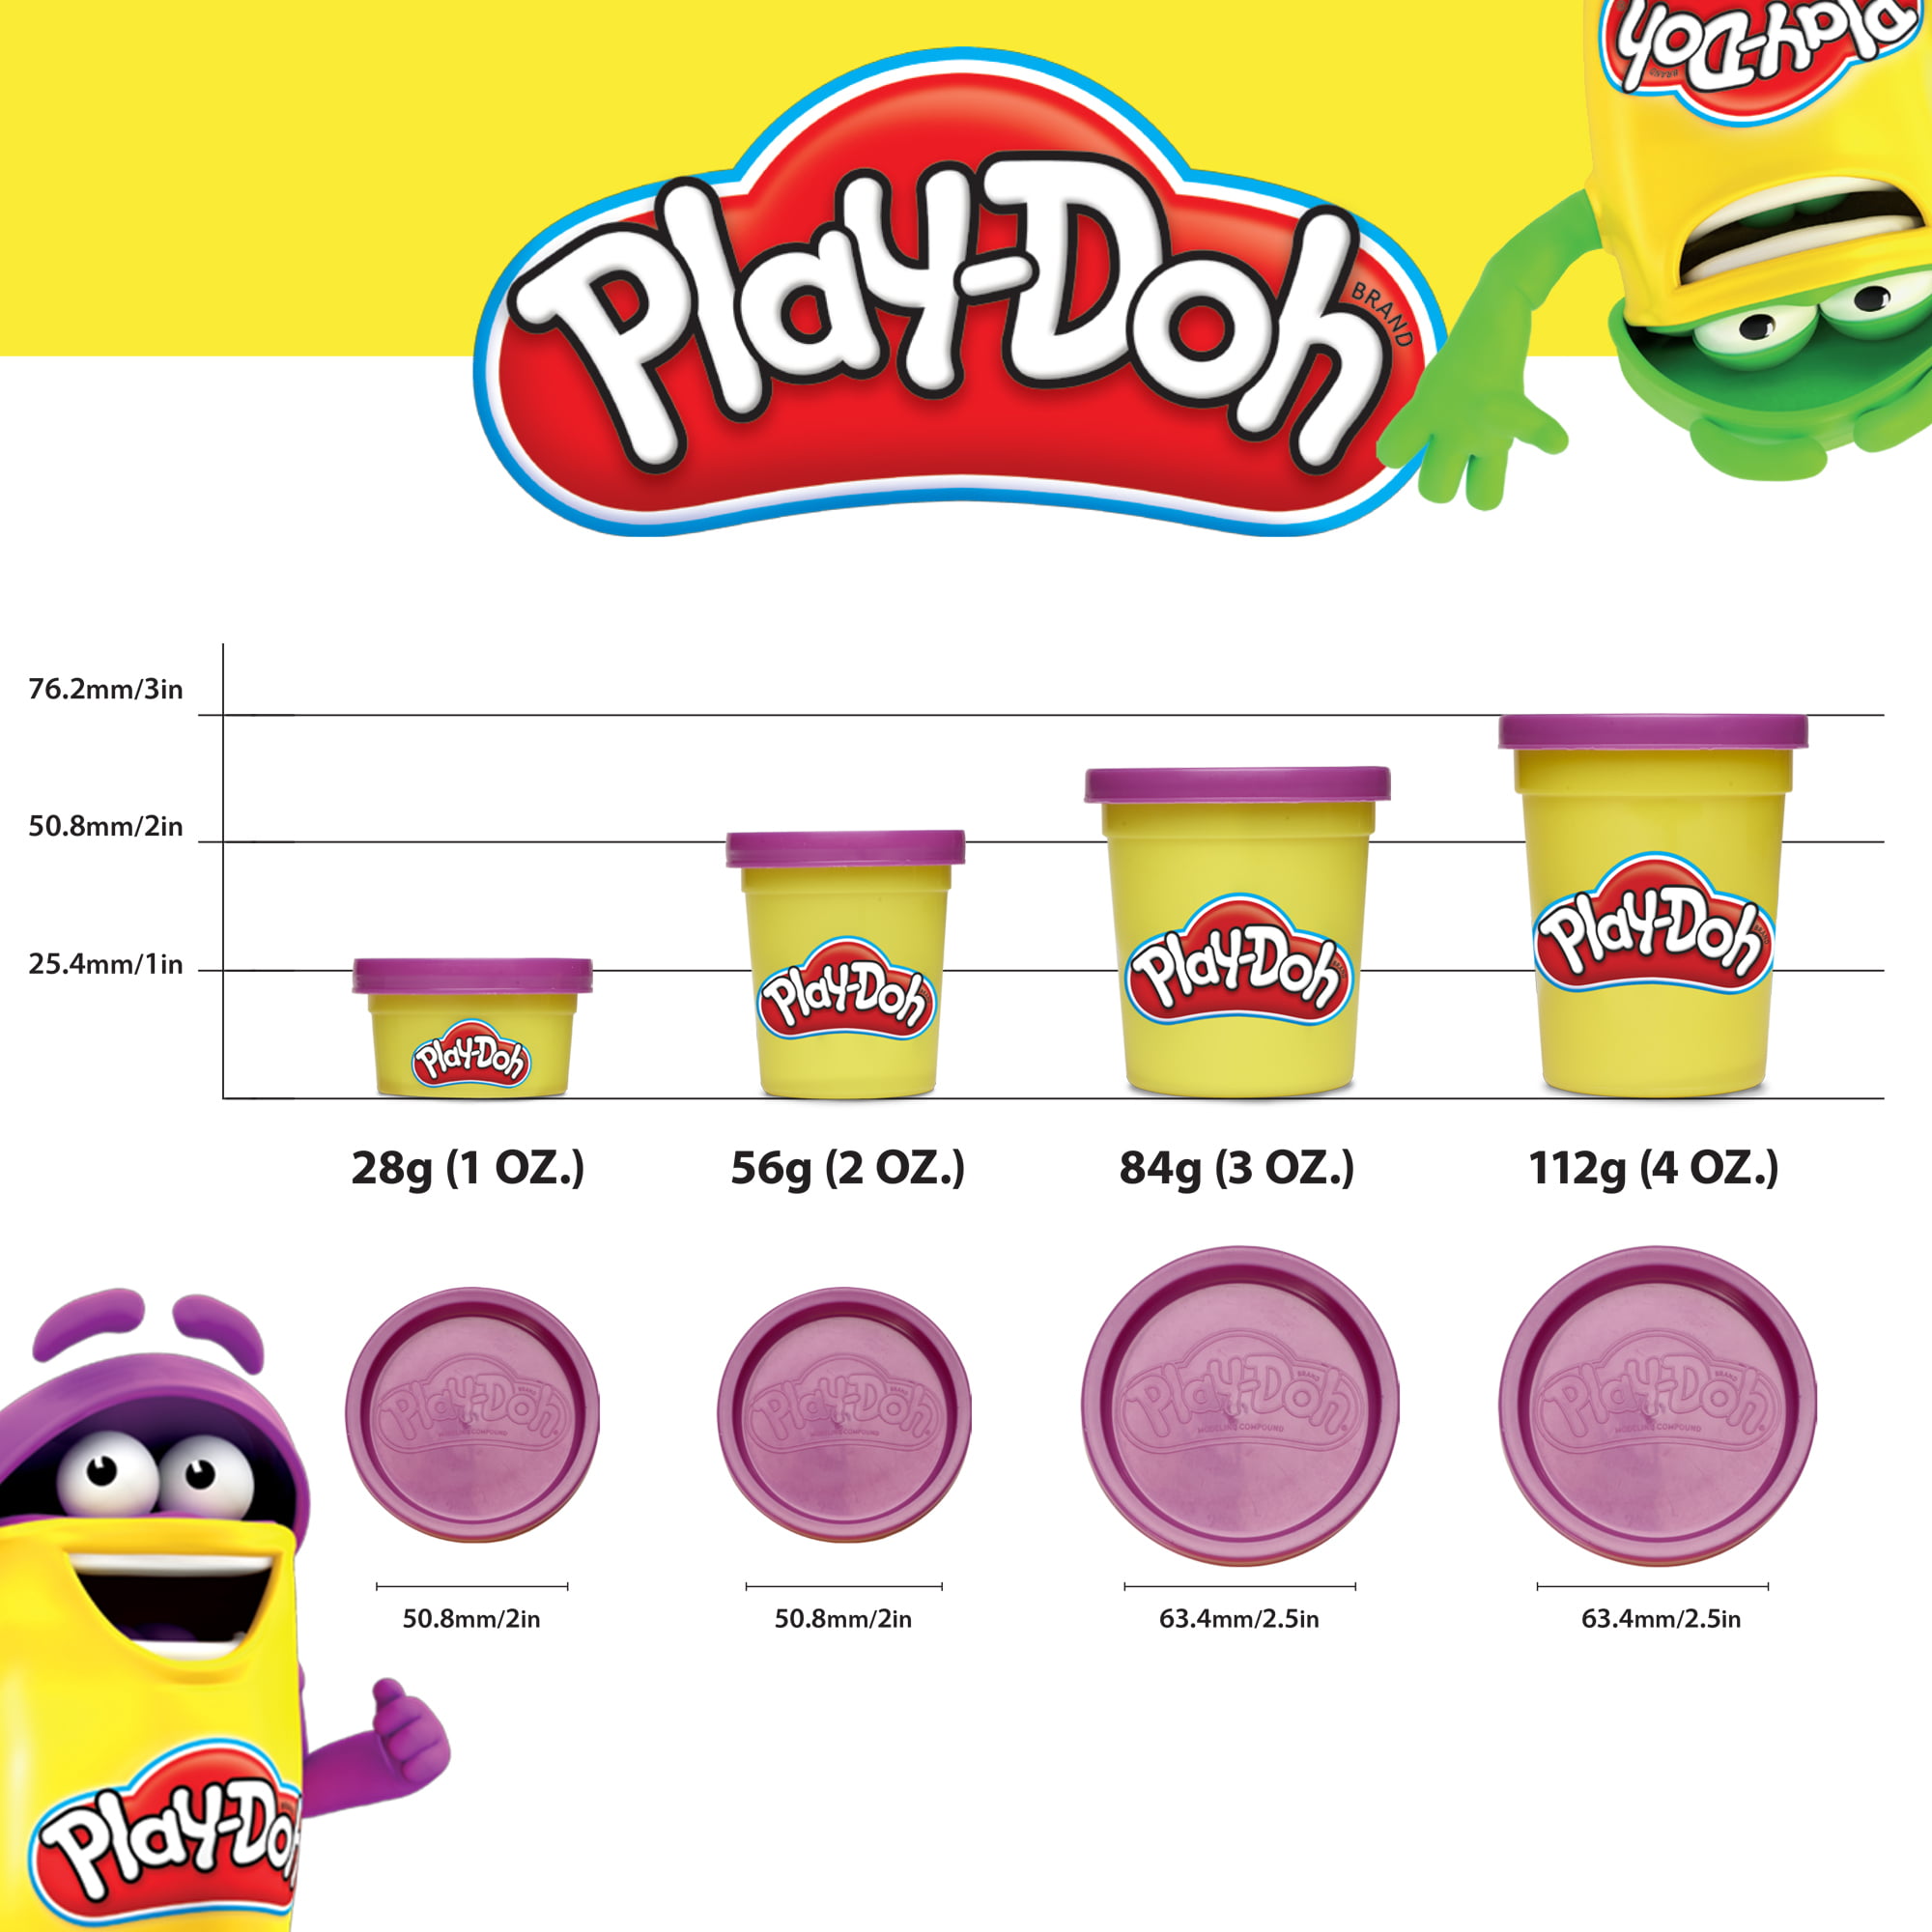  Play-Doh Bulk Mixed Colors 12-Pack of Non-Toxic Modeling  Compound, (4oz) Cans (12-Cans, 48oz) : Toys & Games